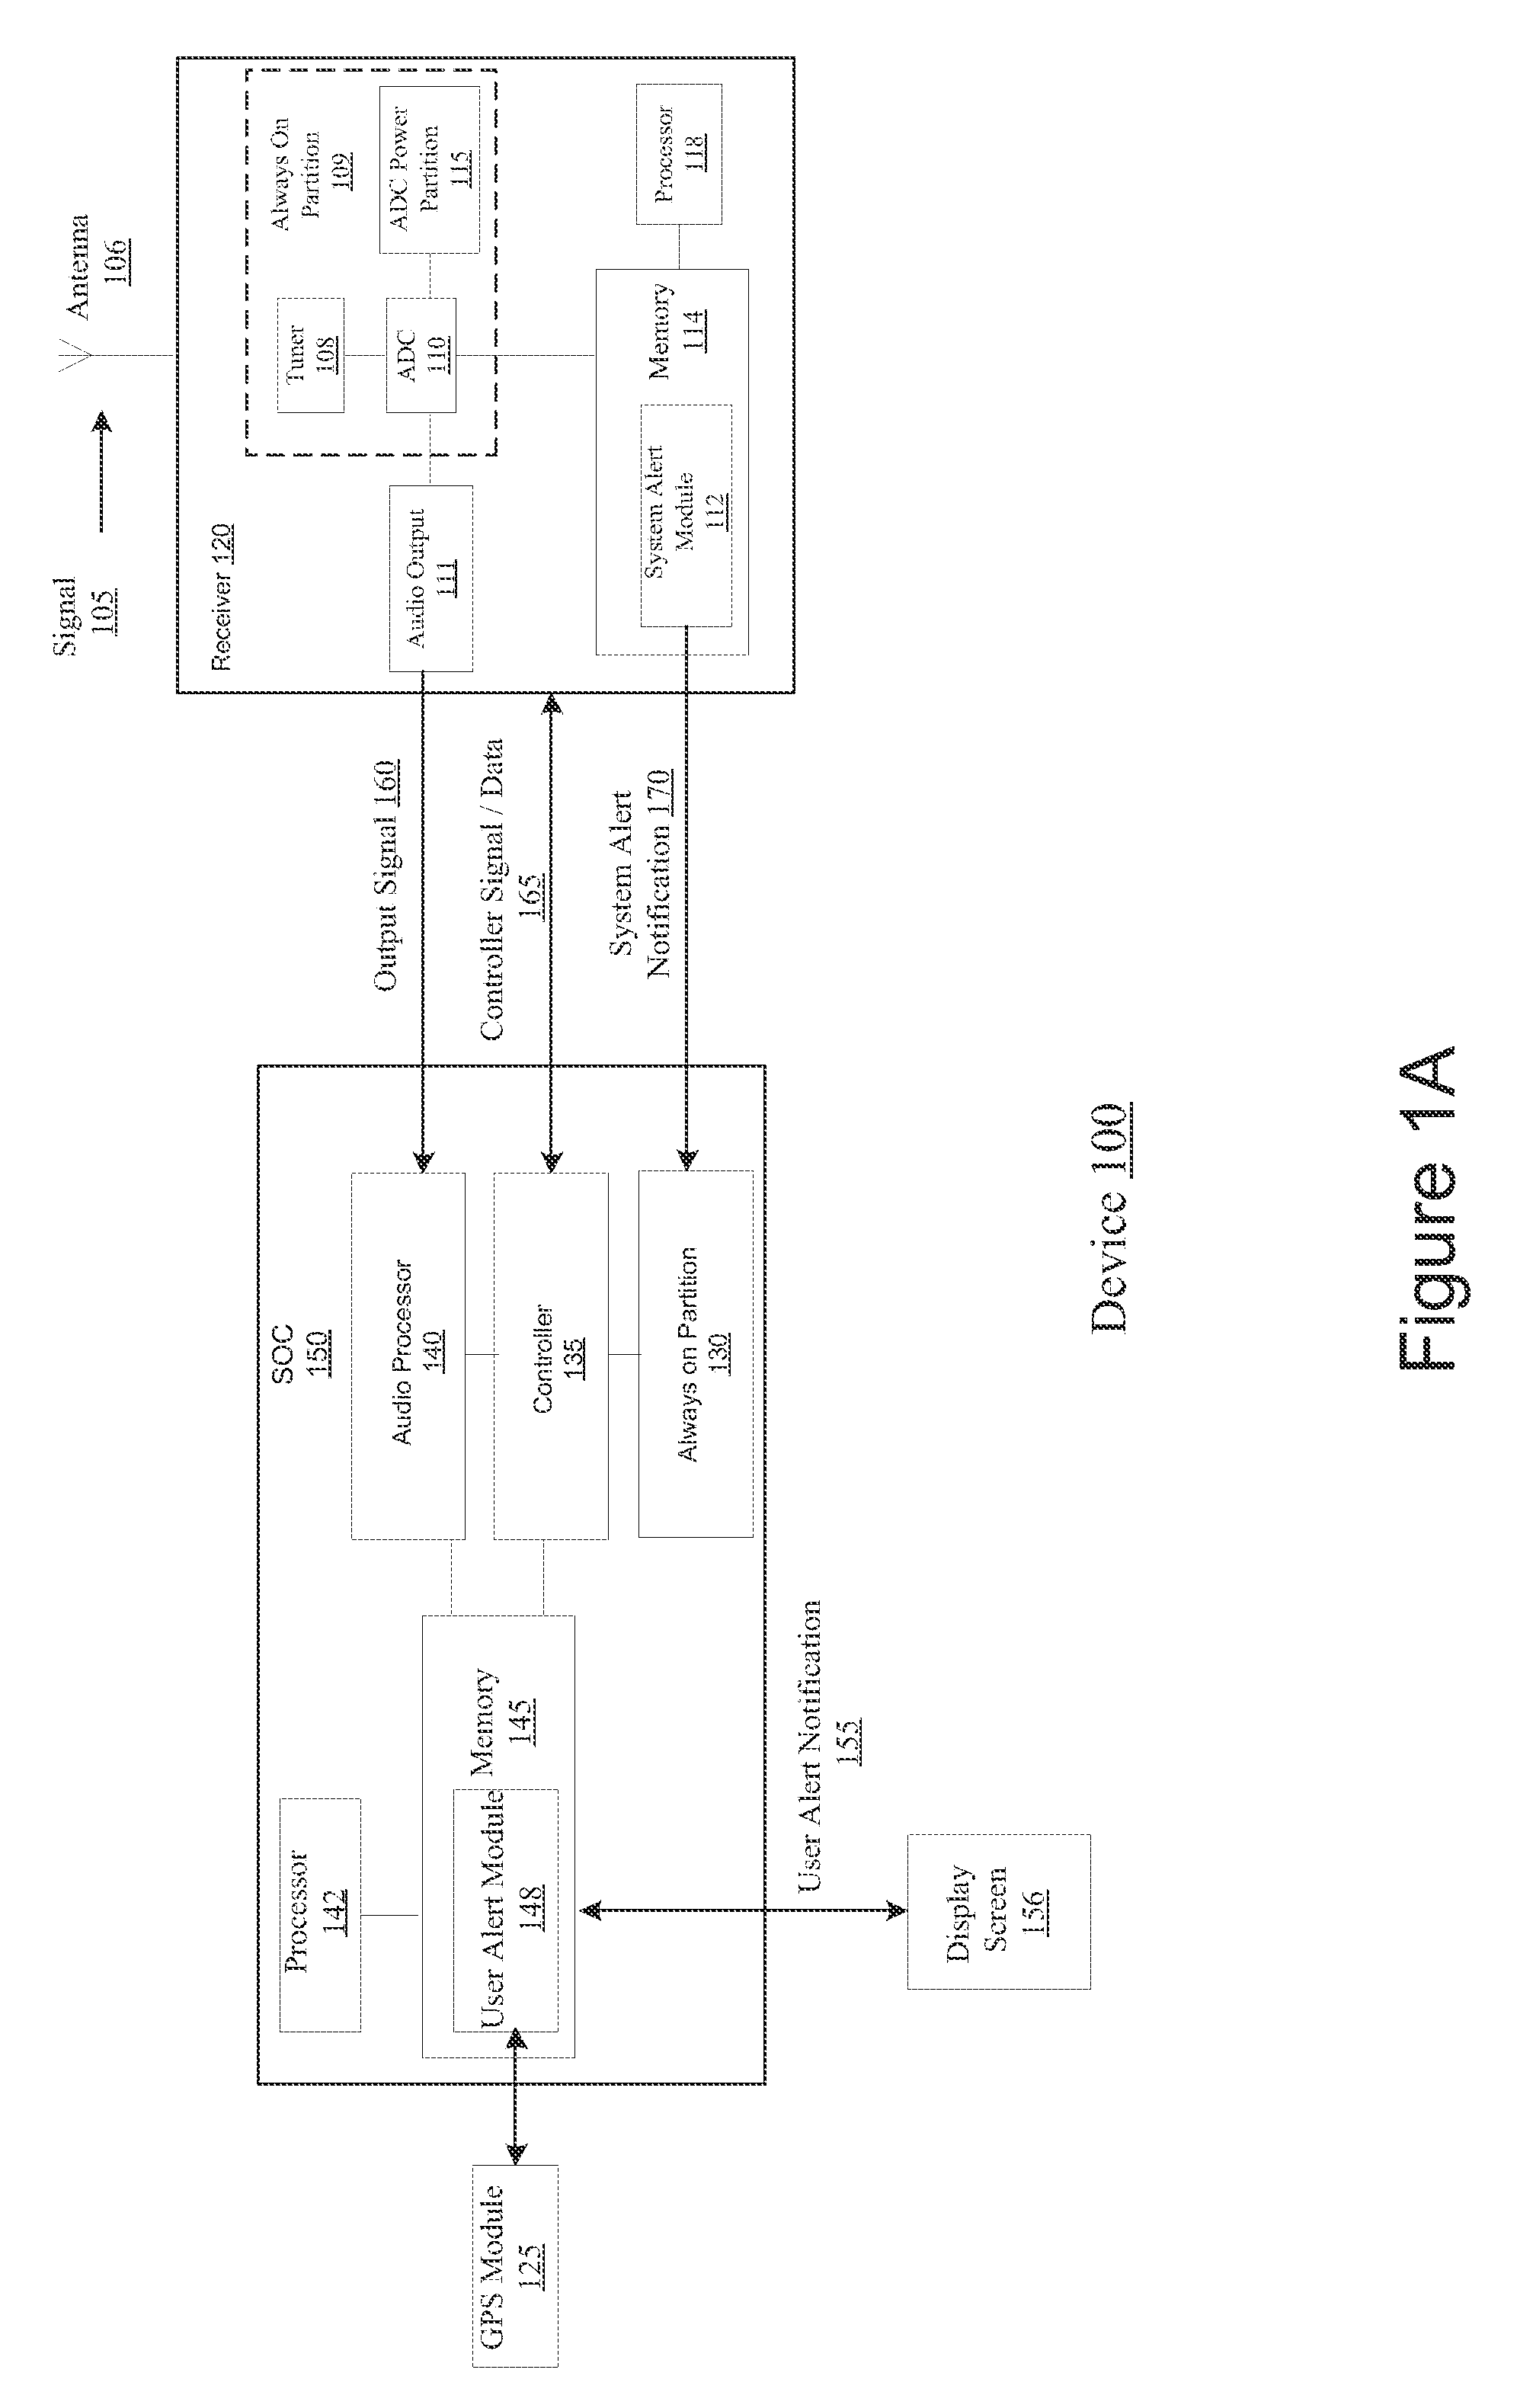 Method and apparatus for generating emergency alert notifications on mobile devices